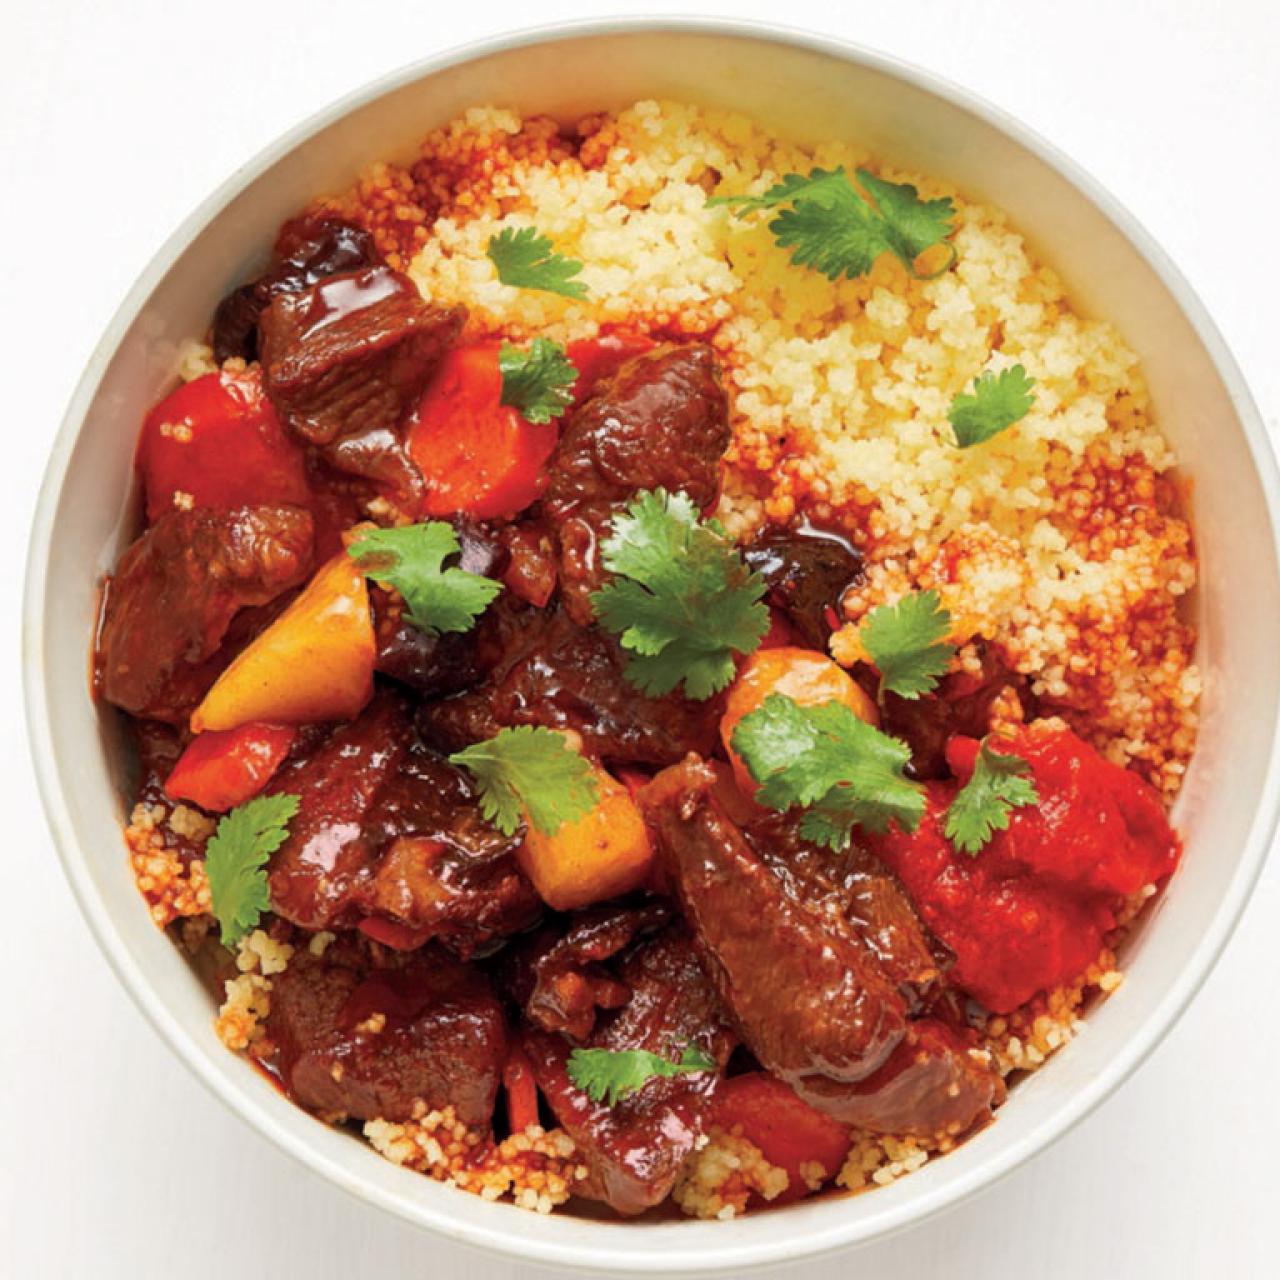 Beef Couscous Recipe - 20 Minutes - Chef Lola's Kitchen